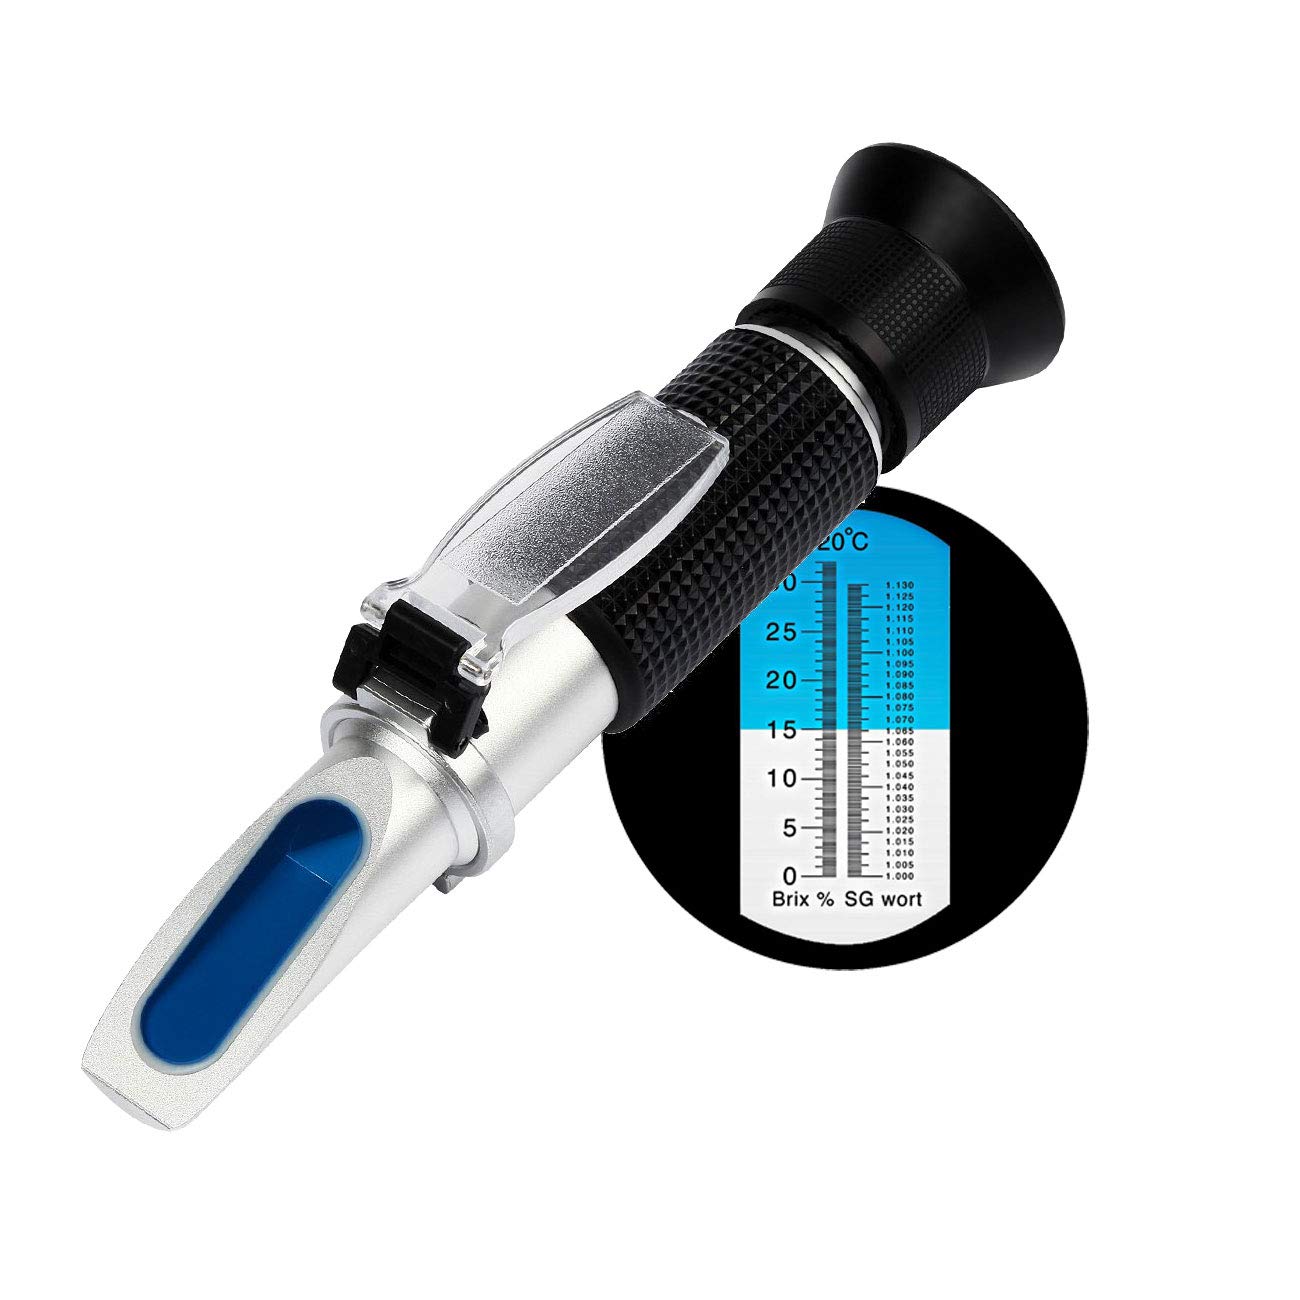 Brix Refractometer Market by Types, Applications, Manufacturers and Forecast Report till 2023